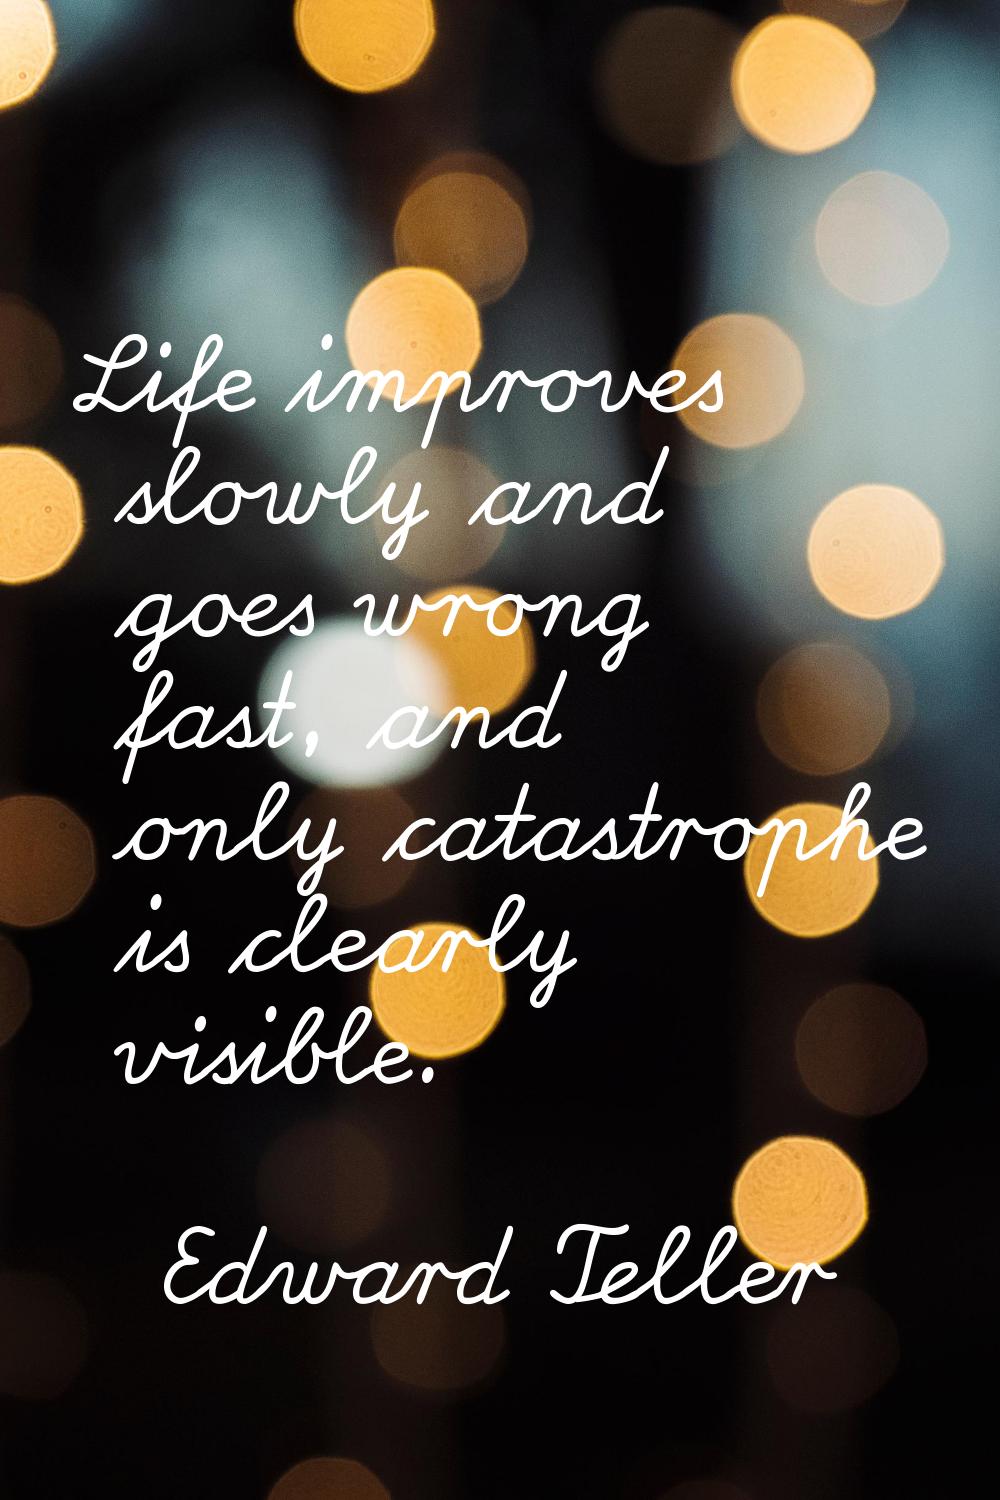 Life improves slowly and goes wrong fast, and only catastrophe is clearly visible.